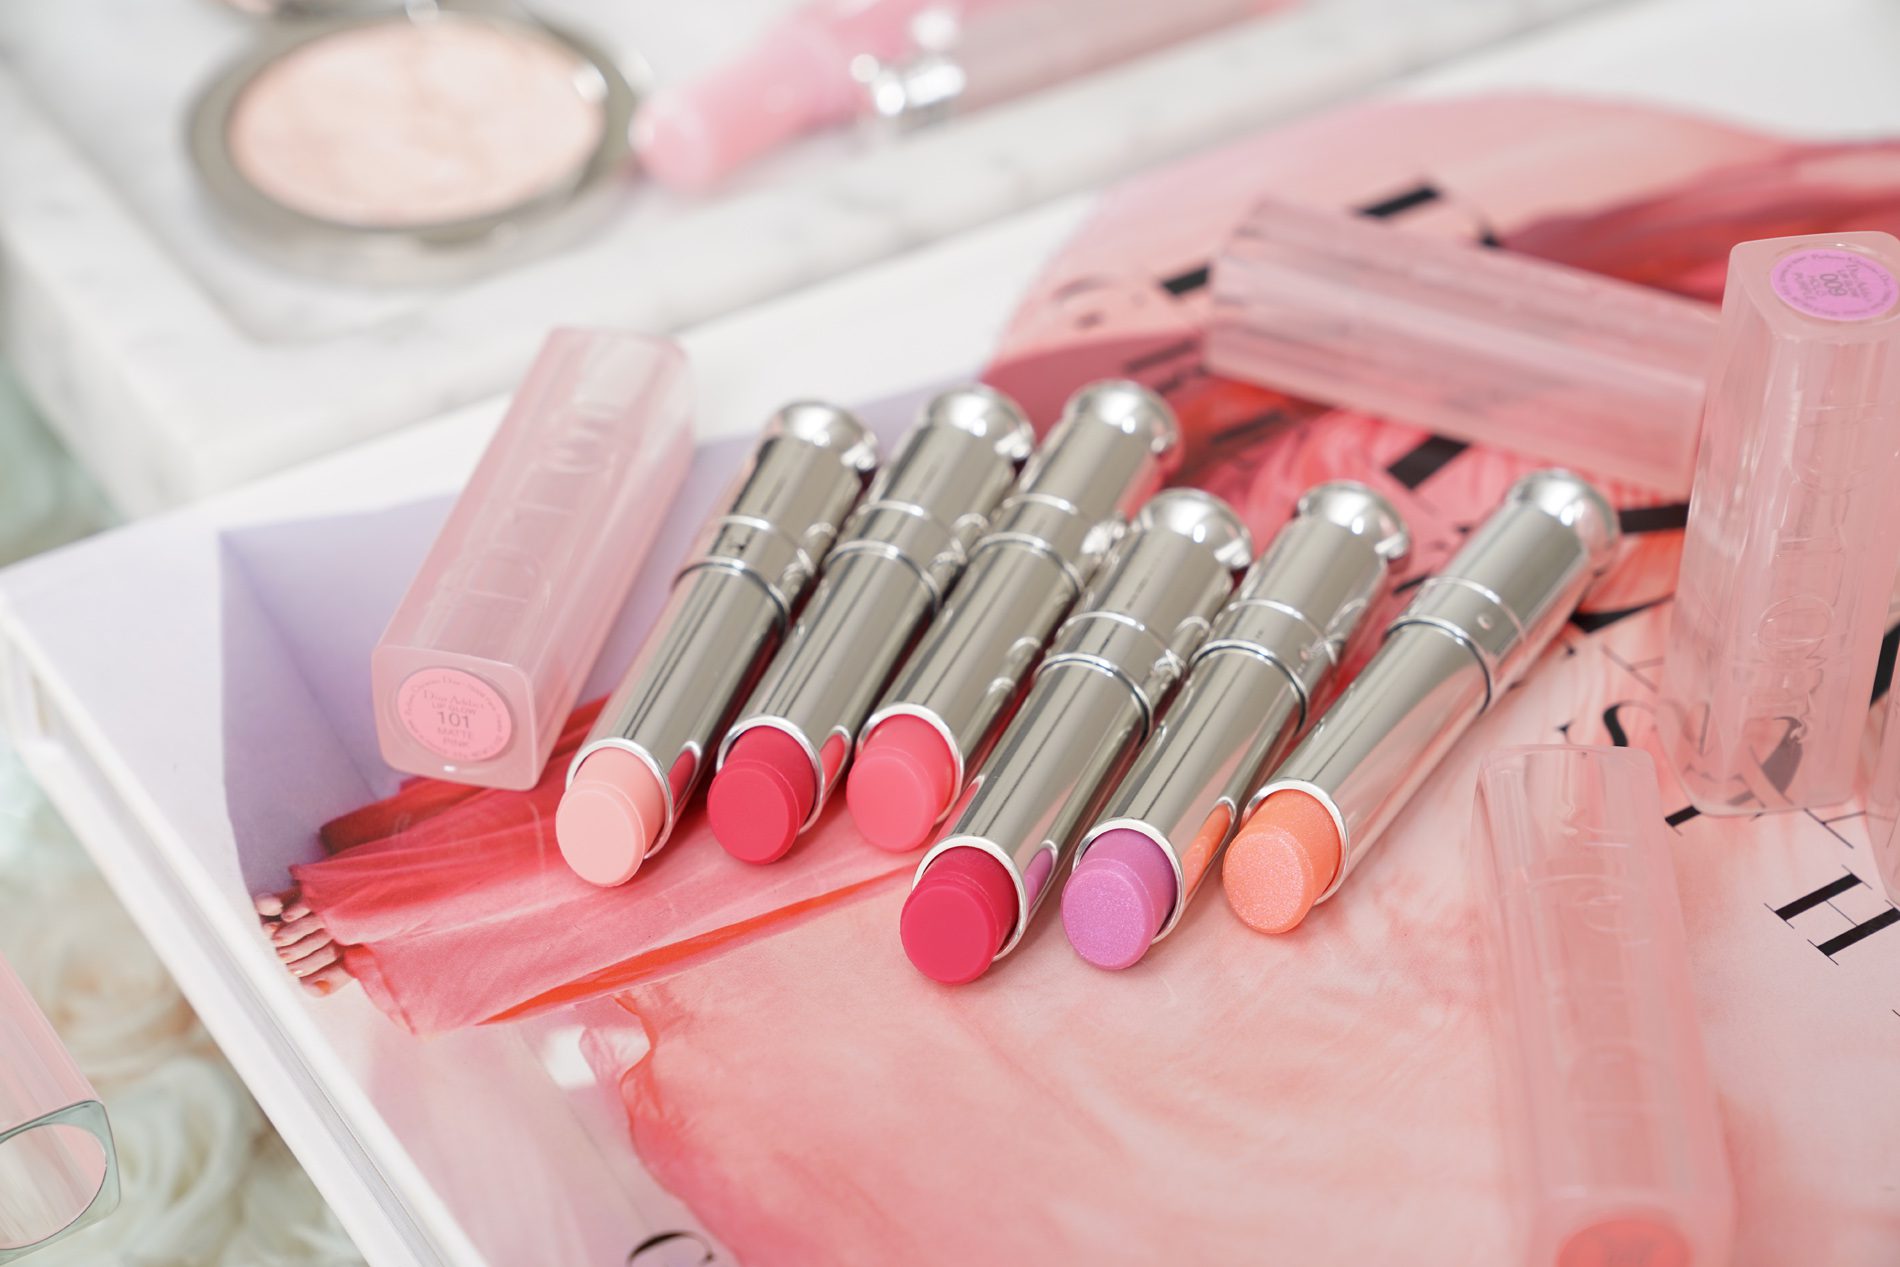 Dior Addict Lip Glow Color Reviver Balms New Shades - The Beauty Look Book